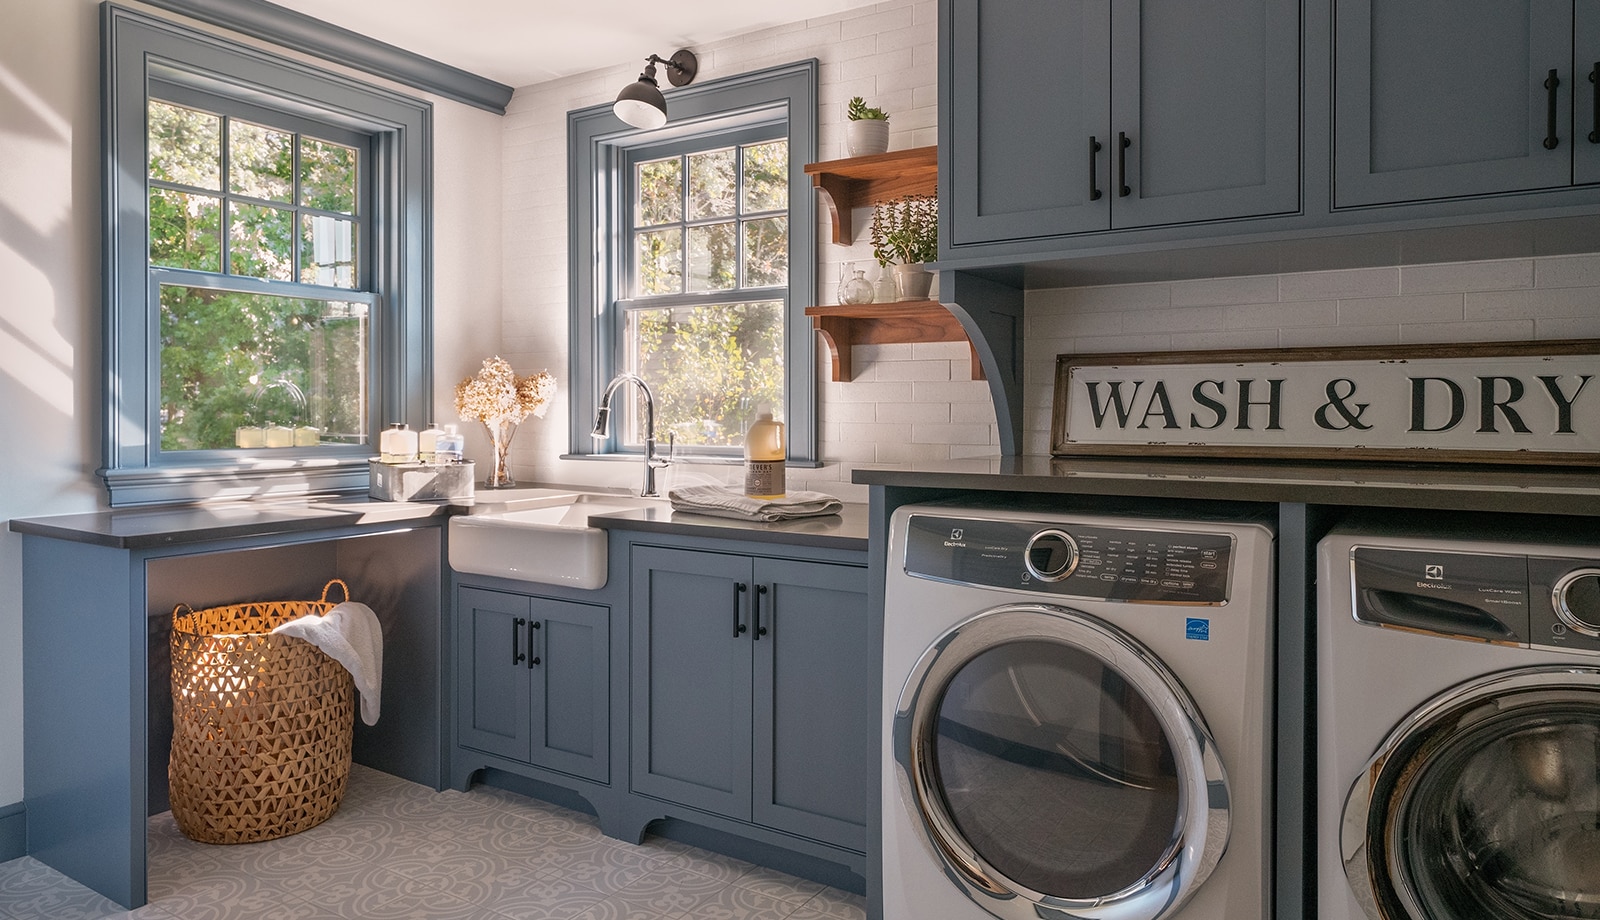 Farmhouse Flair Interiors Ipswich MA Laundry Room featured